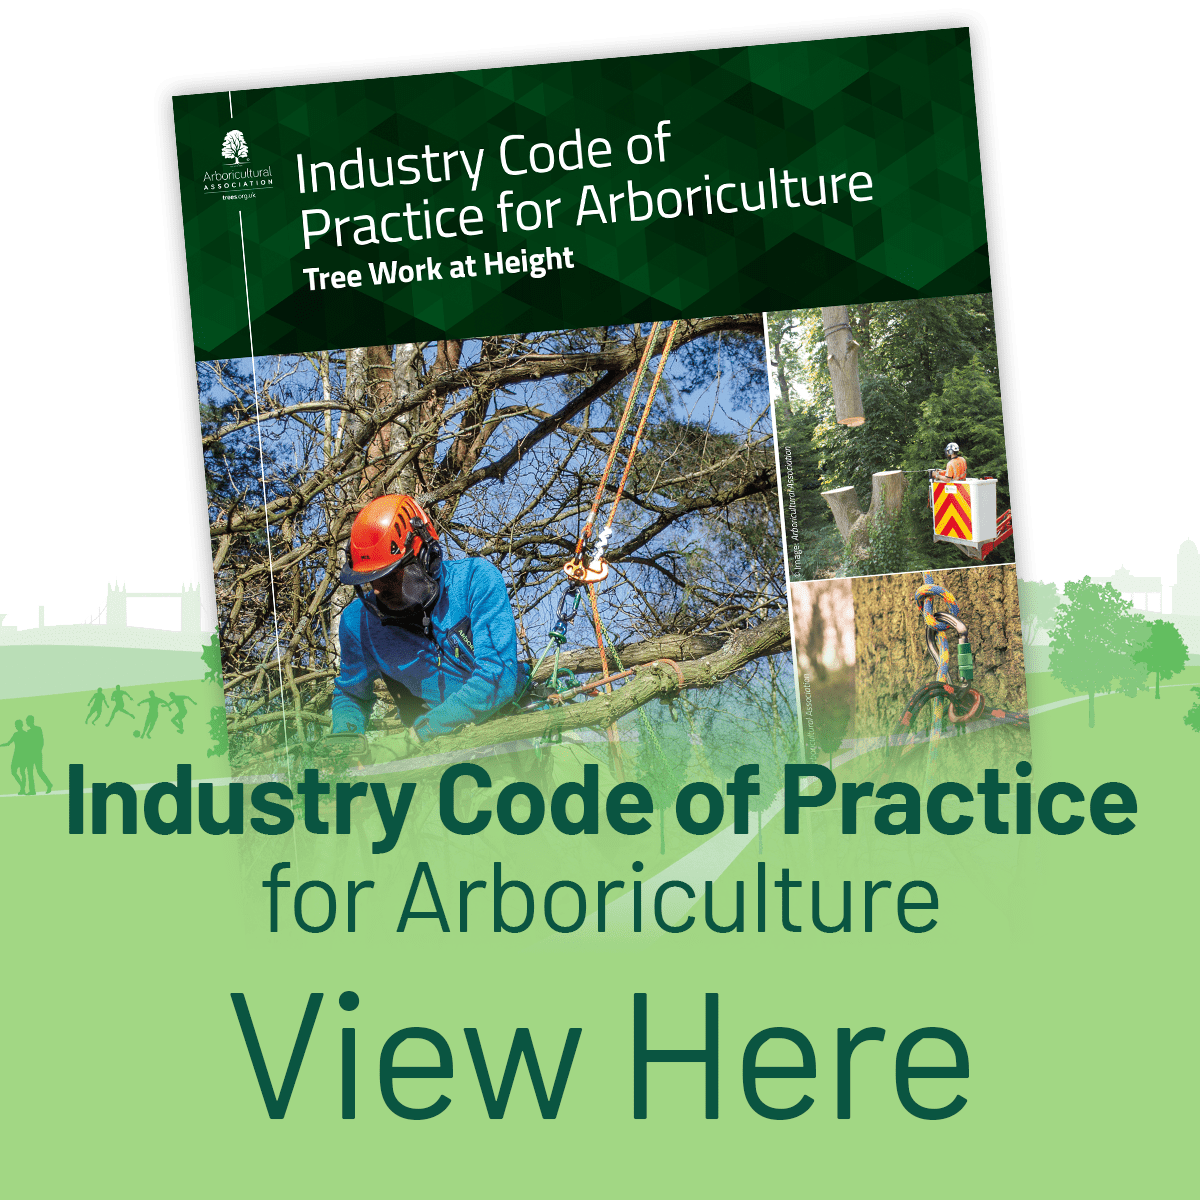 View the Industry Code of Practice: Tree Work at Height